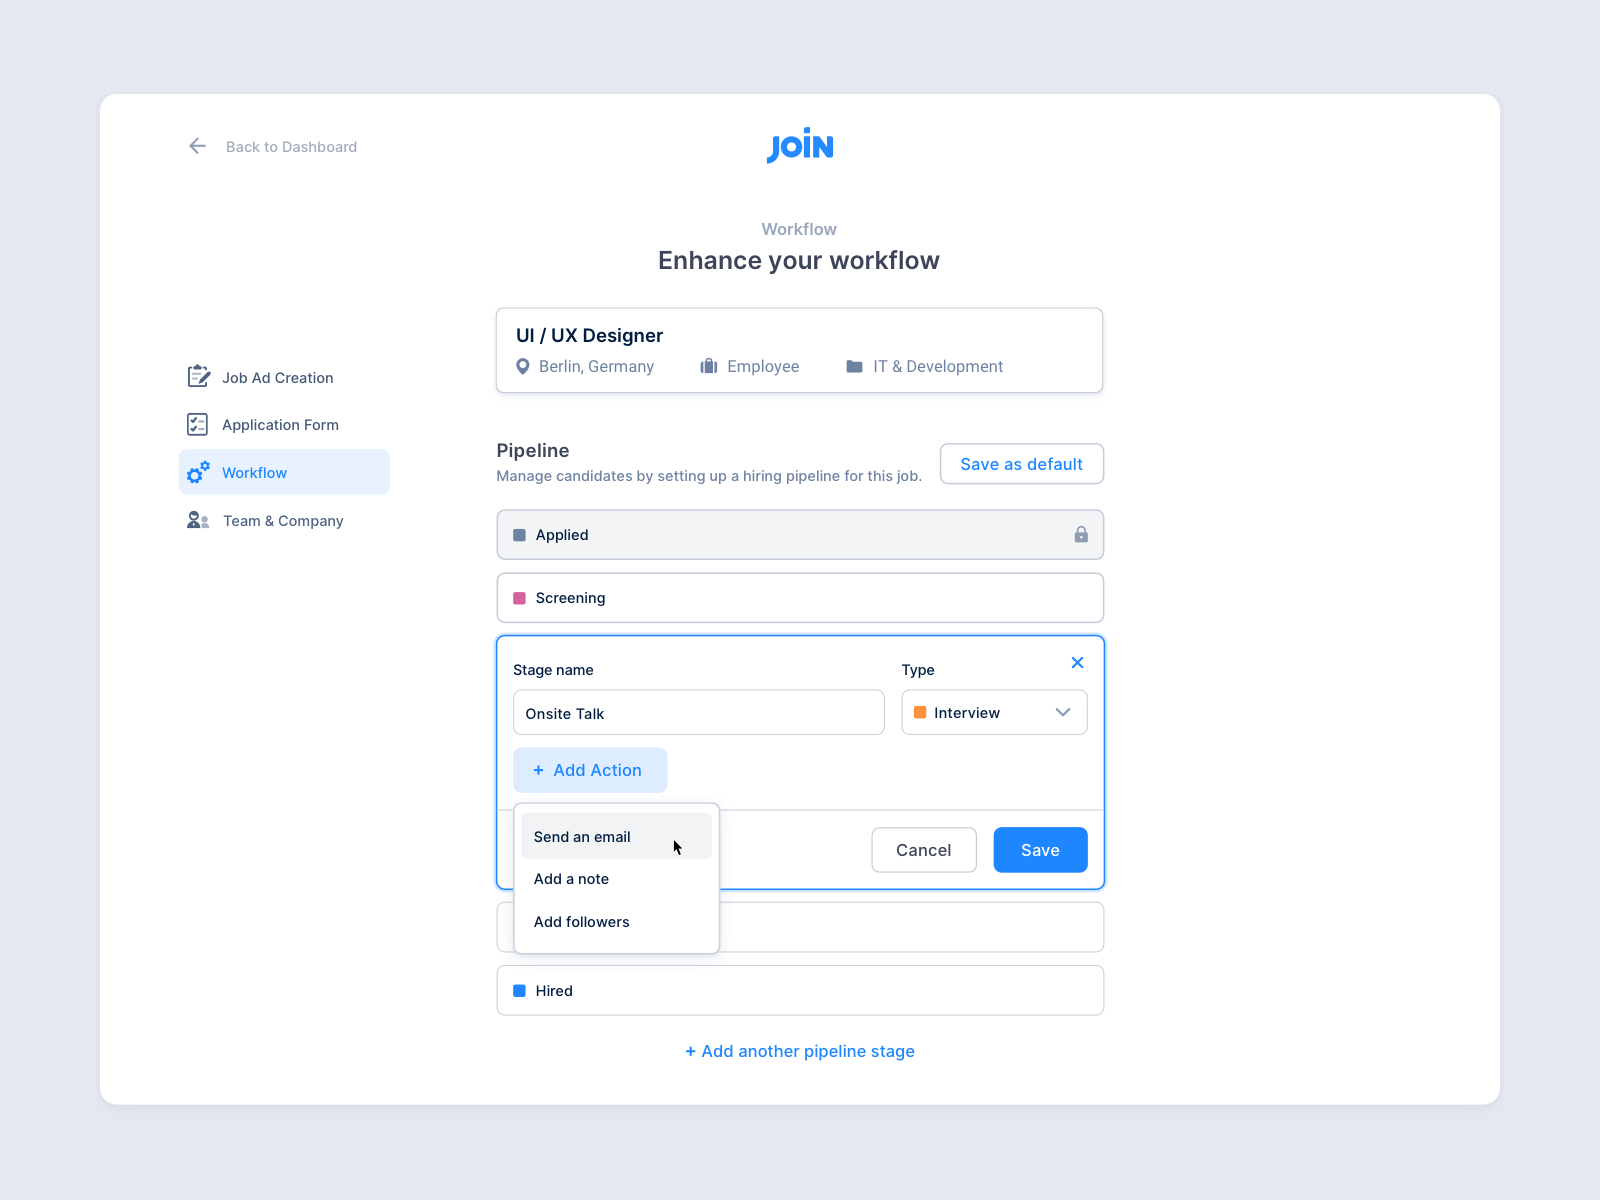 Automated Actions – Workflow by Julian Herbst for Fintory on Dribbble